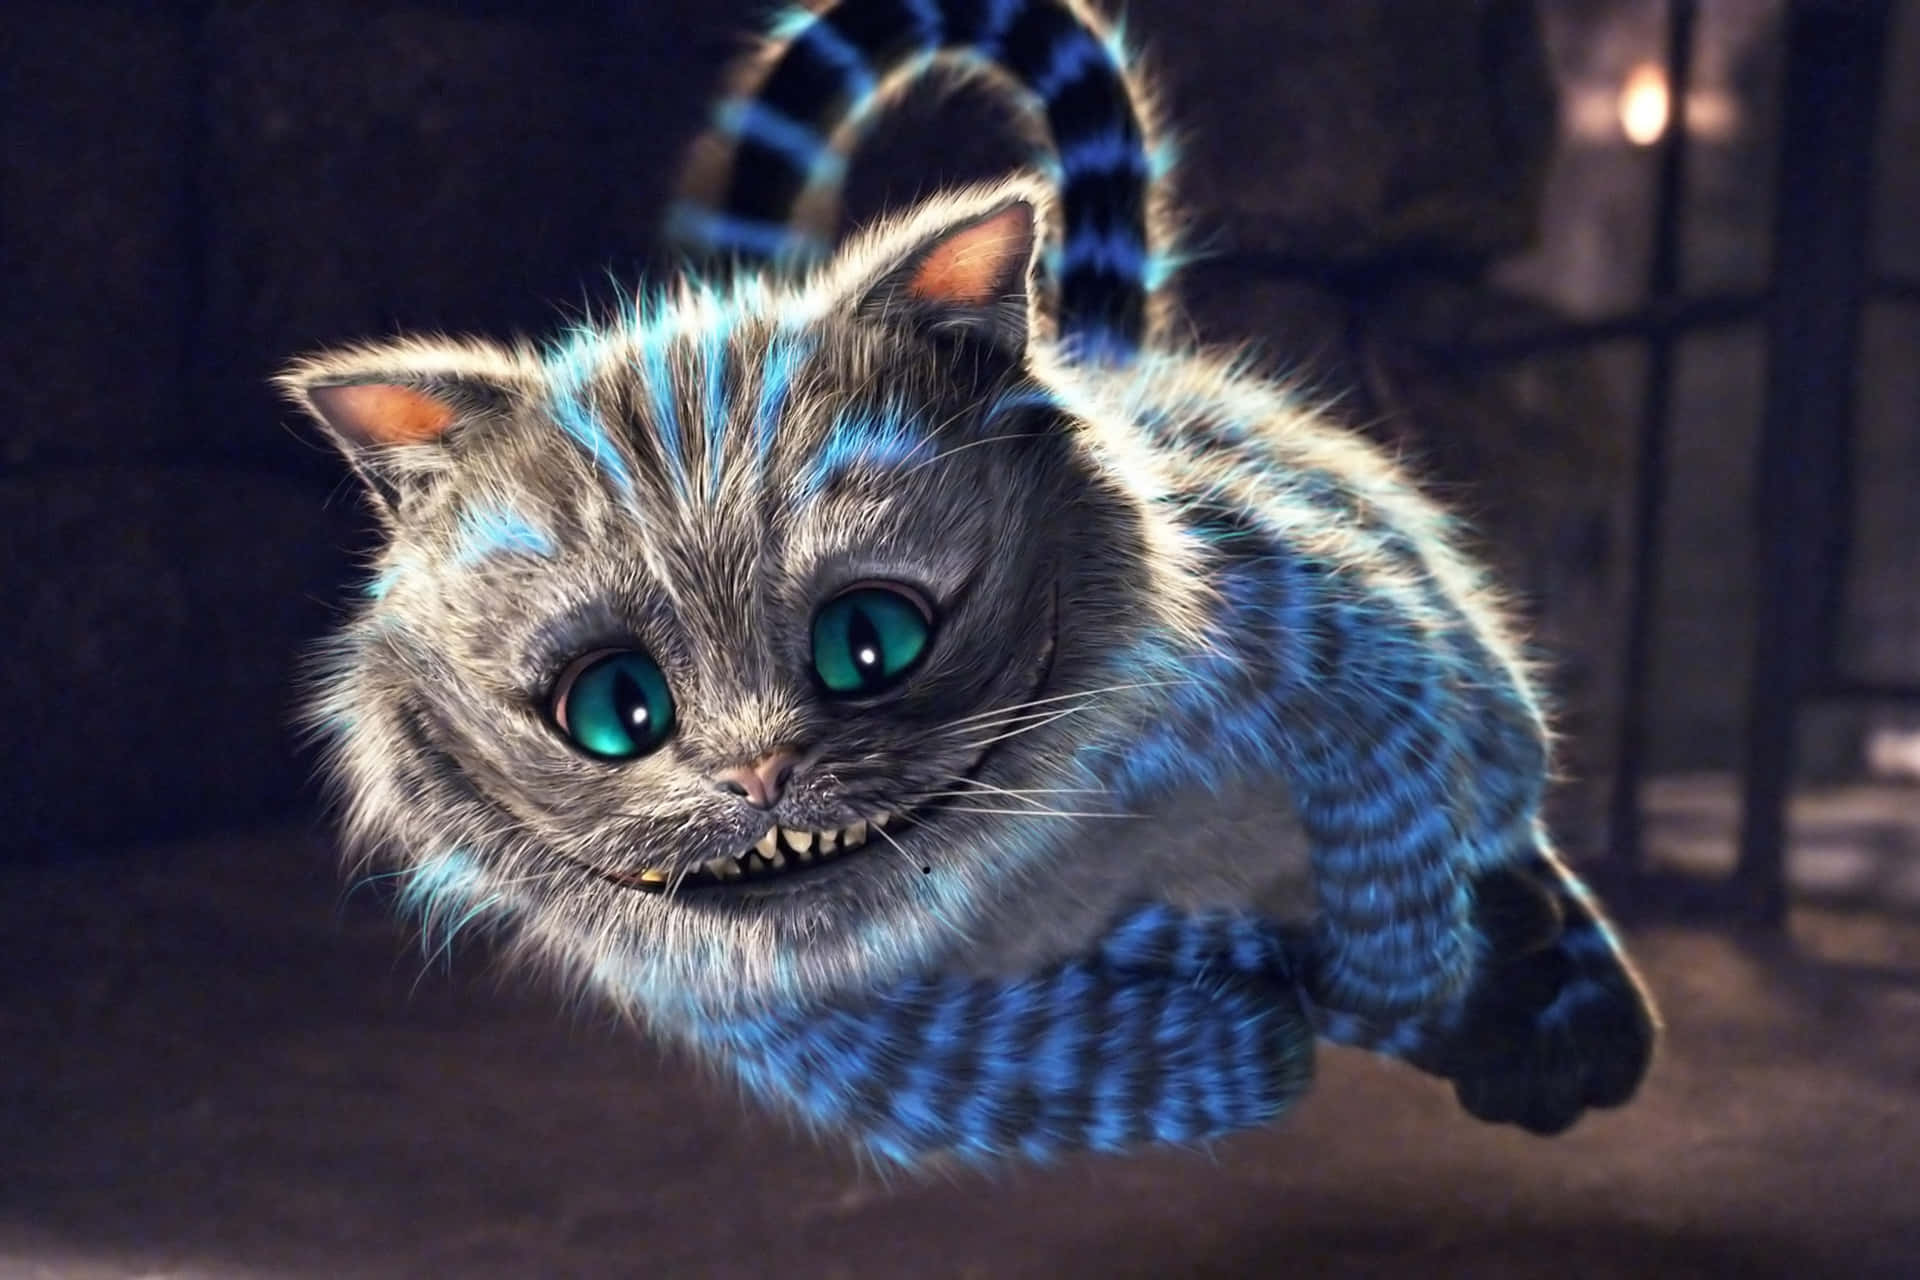 Image  Magical Cheshire Cat Looking Intently at the Bewildered Alice